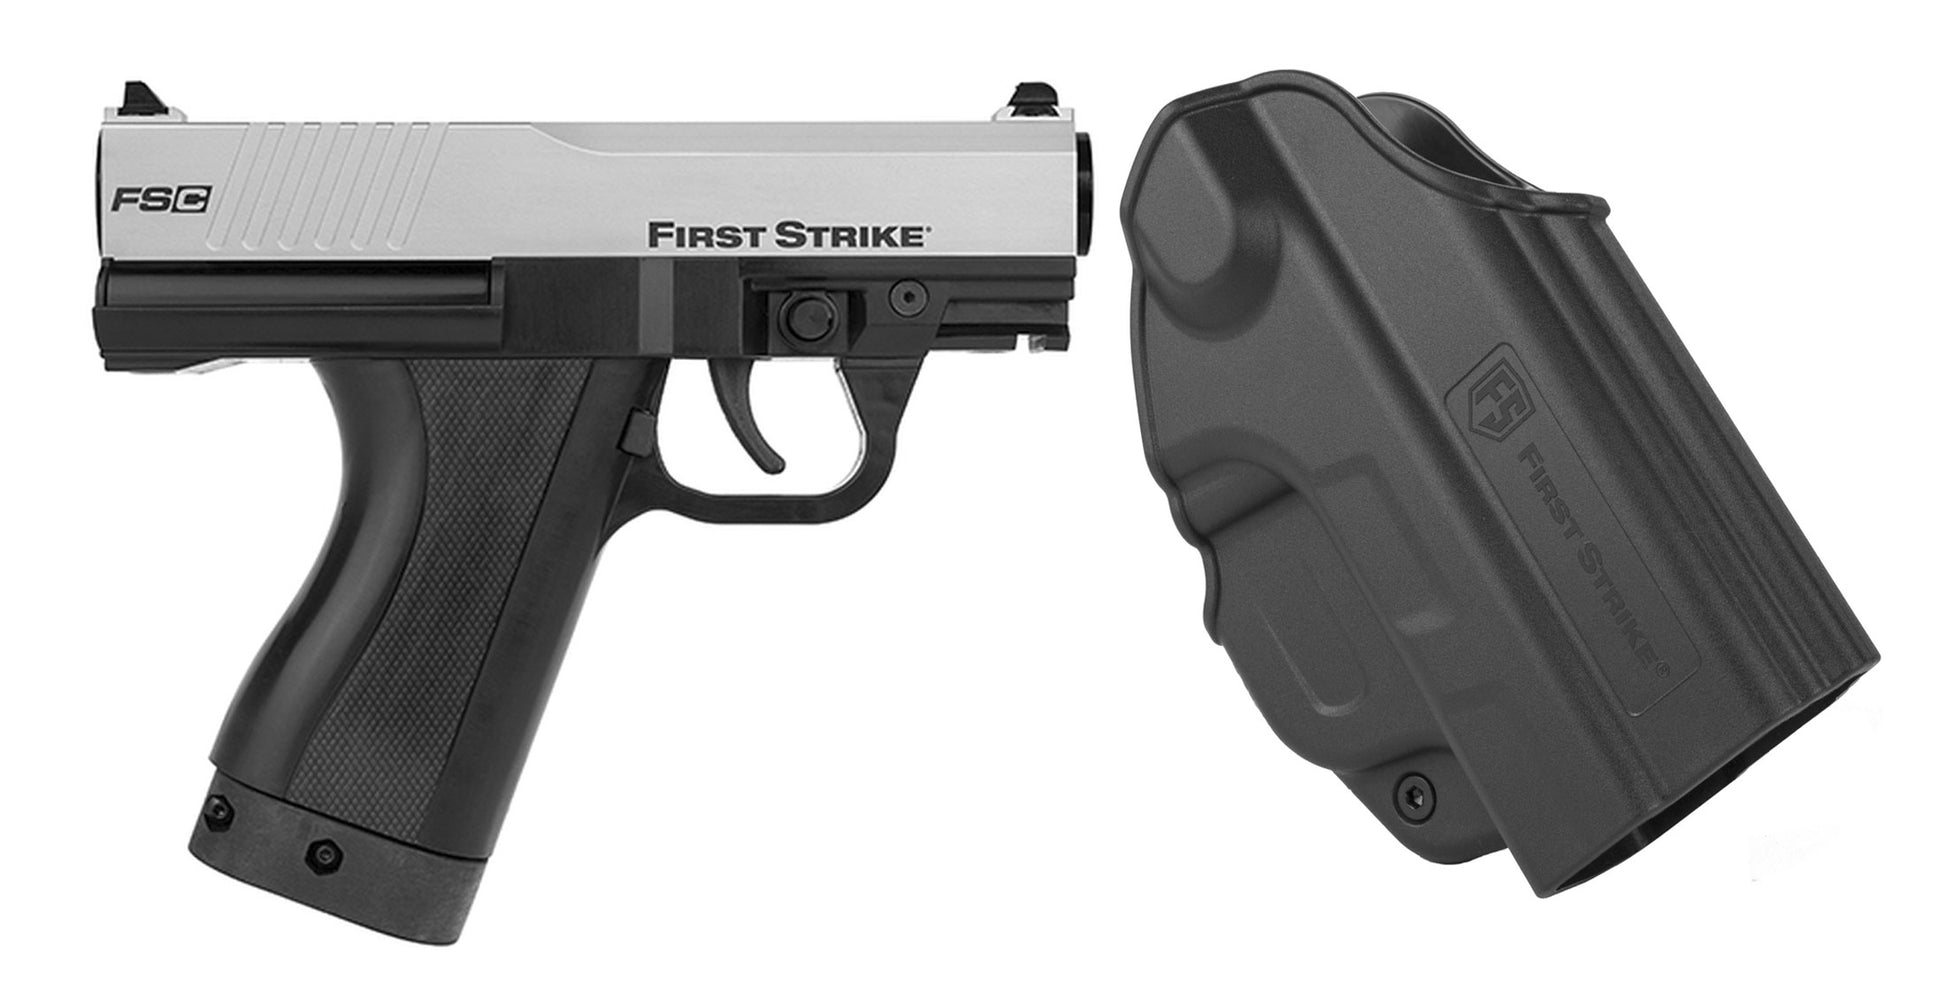 First Strike FSC (First Strike Compact) Paintball Pistol with Holster - Silver/Black - First Strike